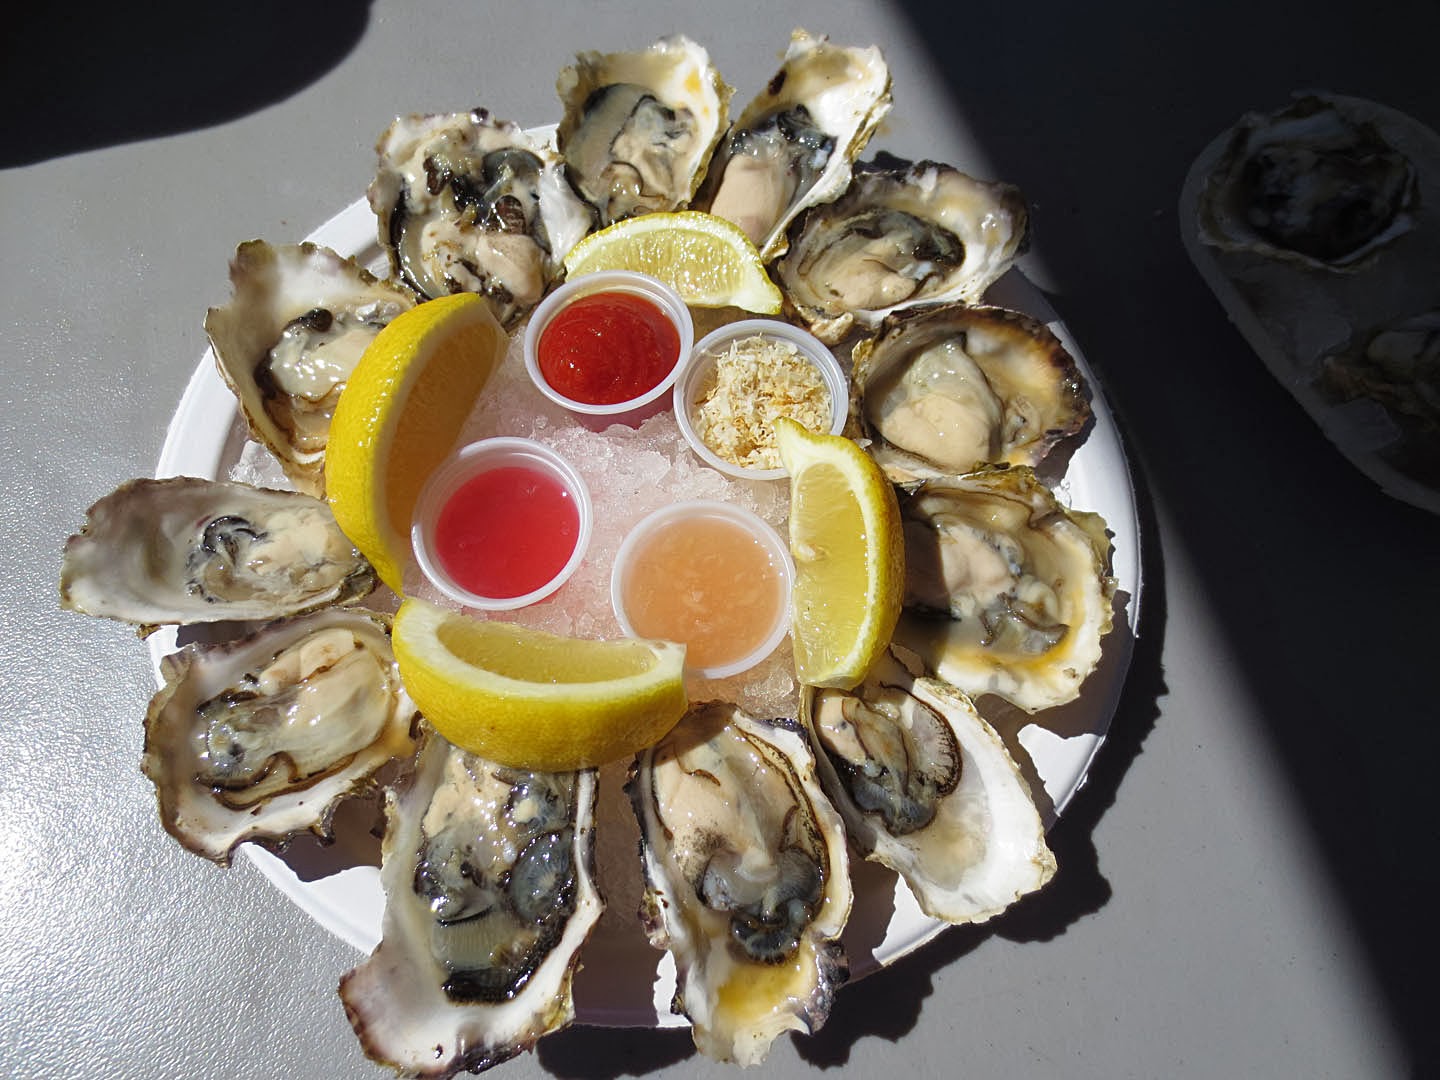 Raw oysters served with 3 types of vinaigrette, horseradish, and lemons